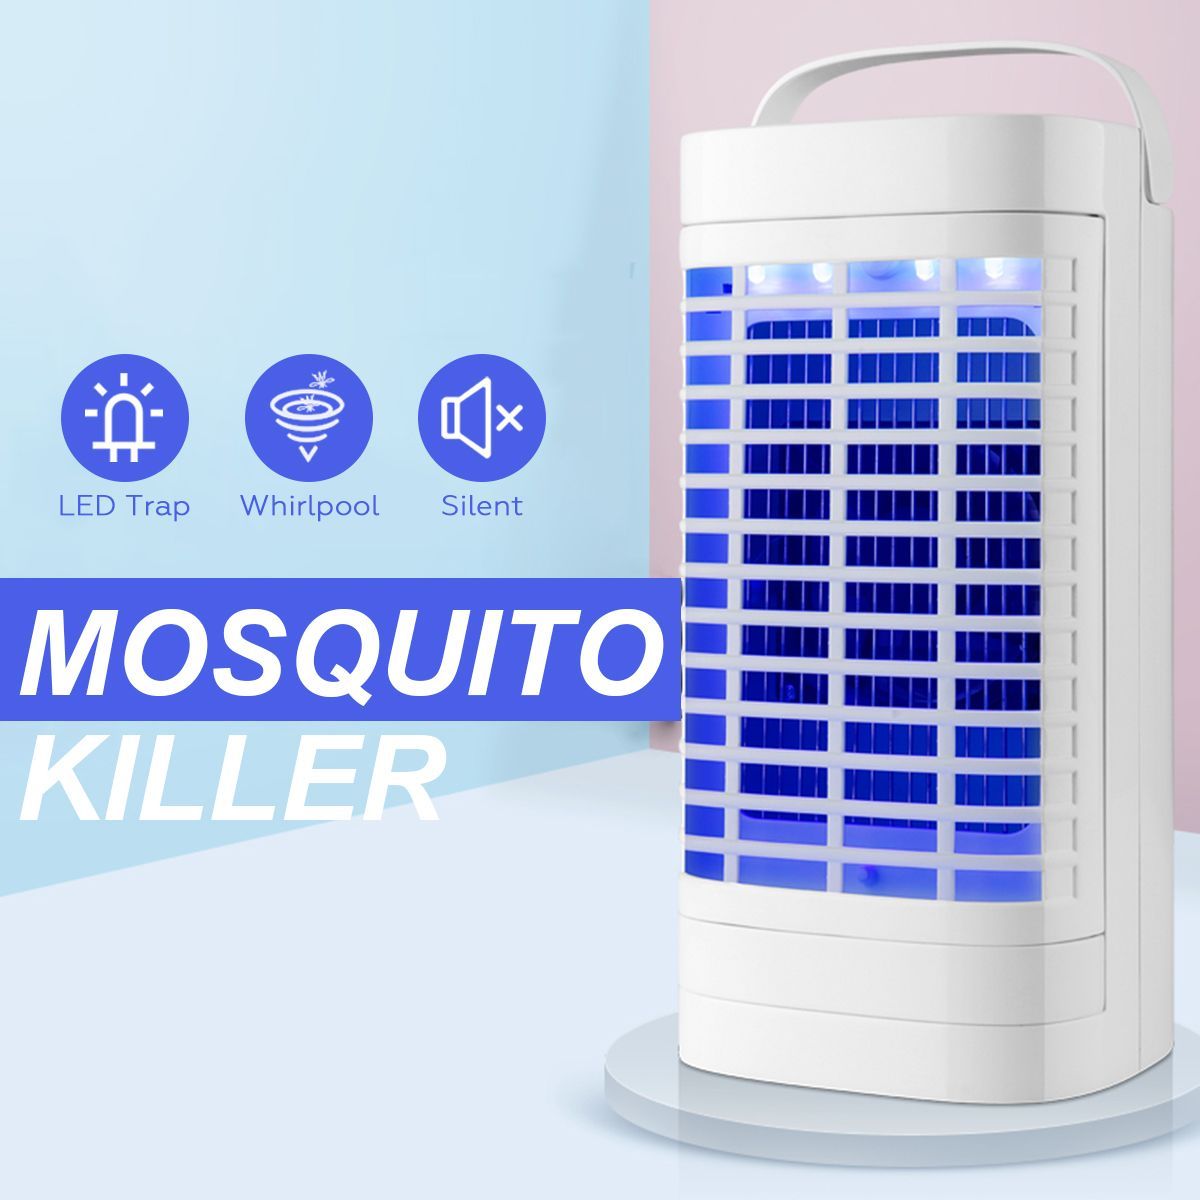 Electric-Fly-Bug-Zapper-Mosquito-Insect-Killer-Lamp-LED-Light-Trap-Pest-Control-1679470